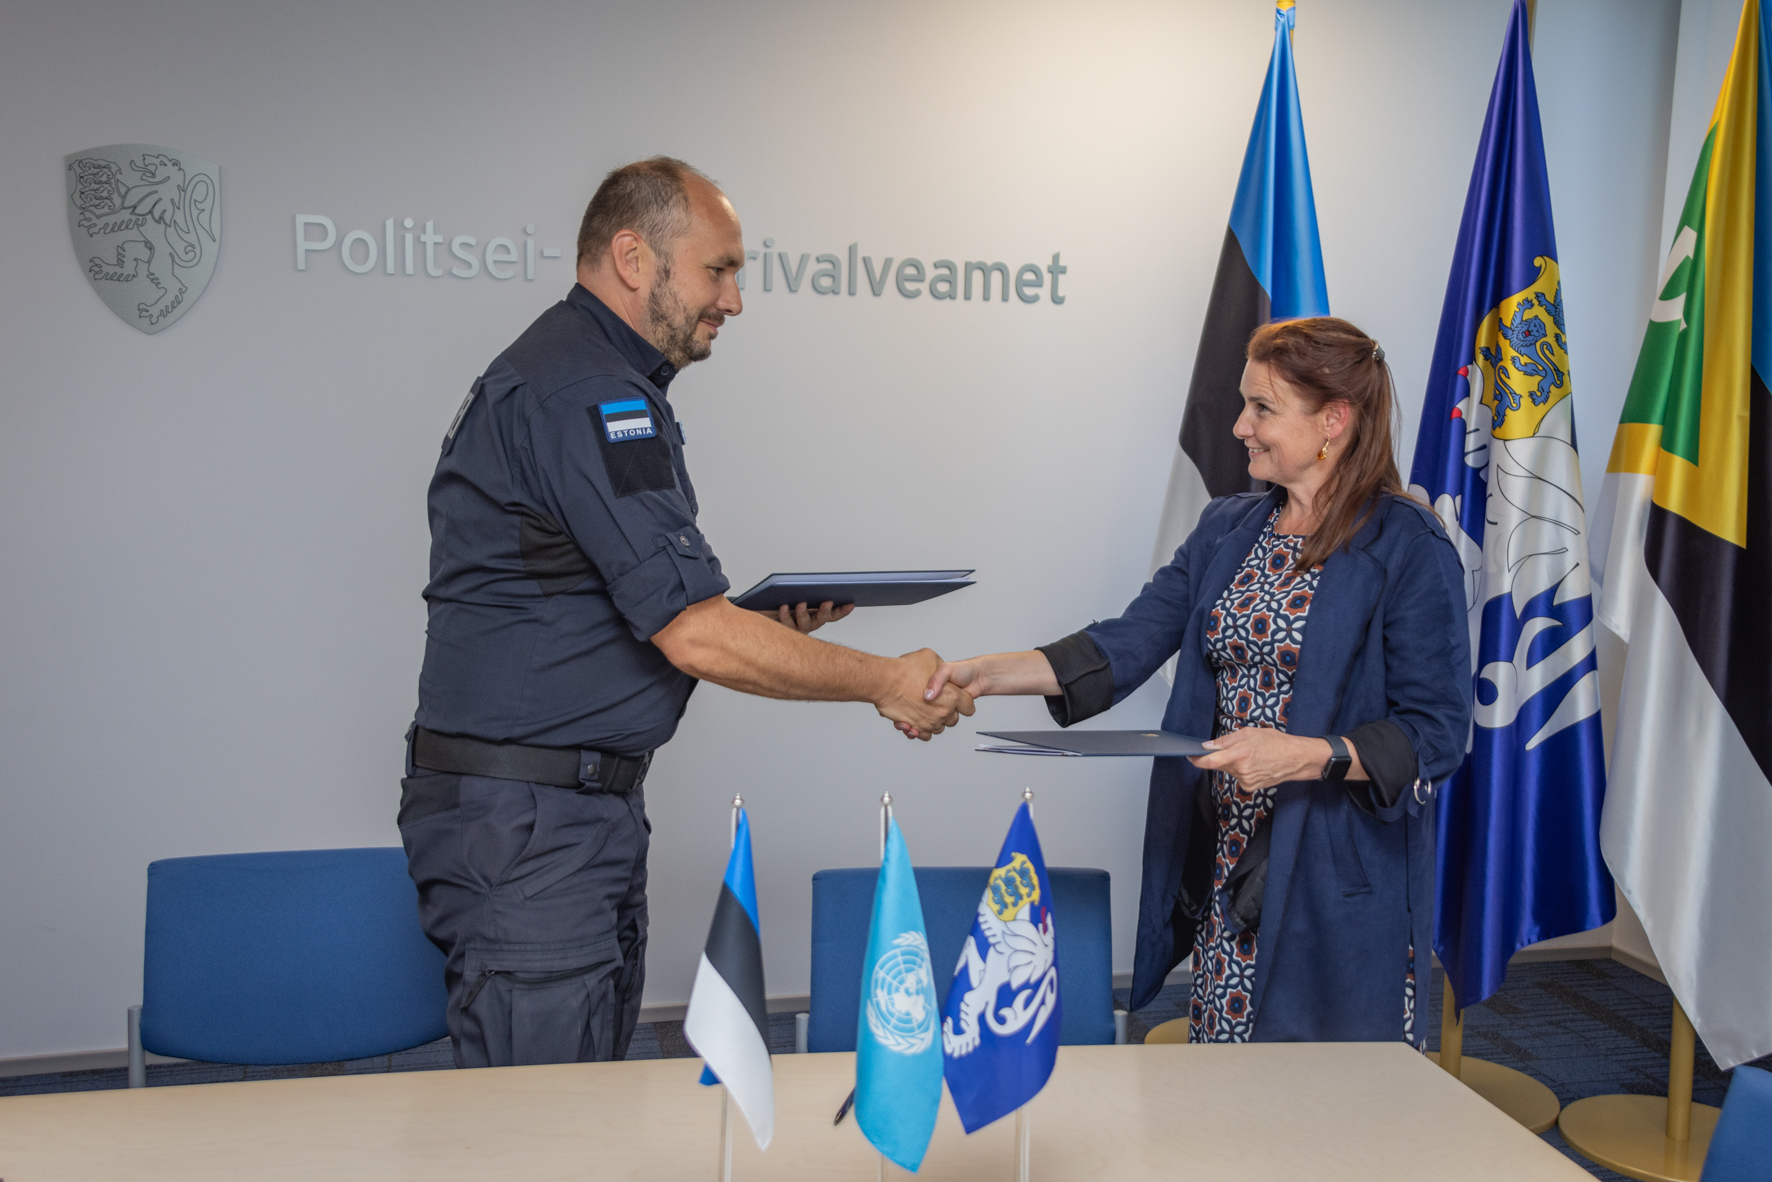 Estonian Police and Border Guard Board working with UNHCR to help refugees  – UNHCR Northern Europe